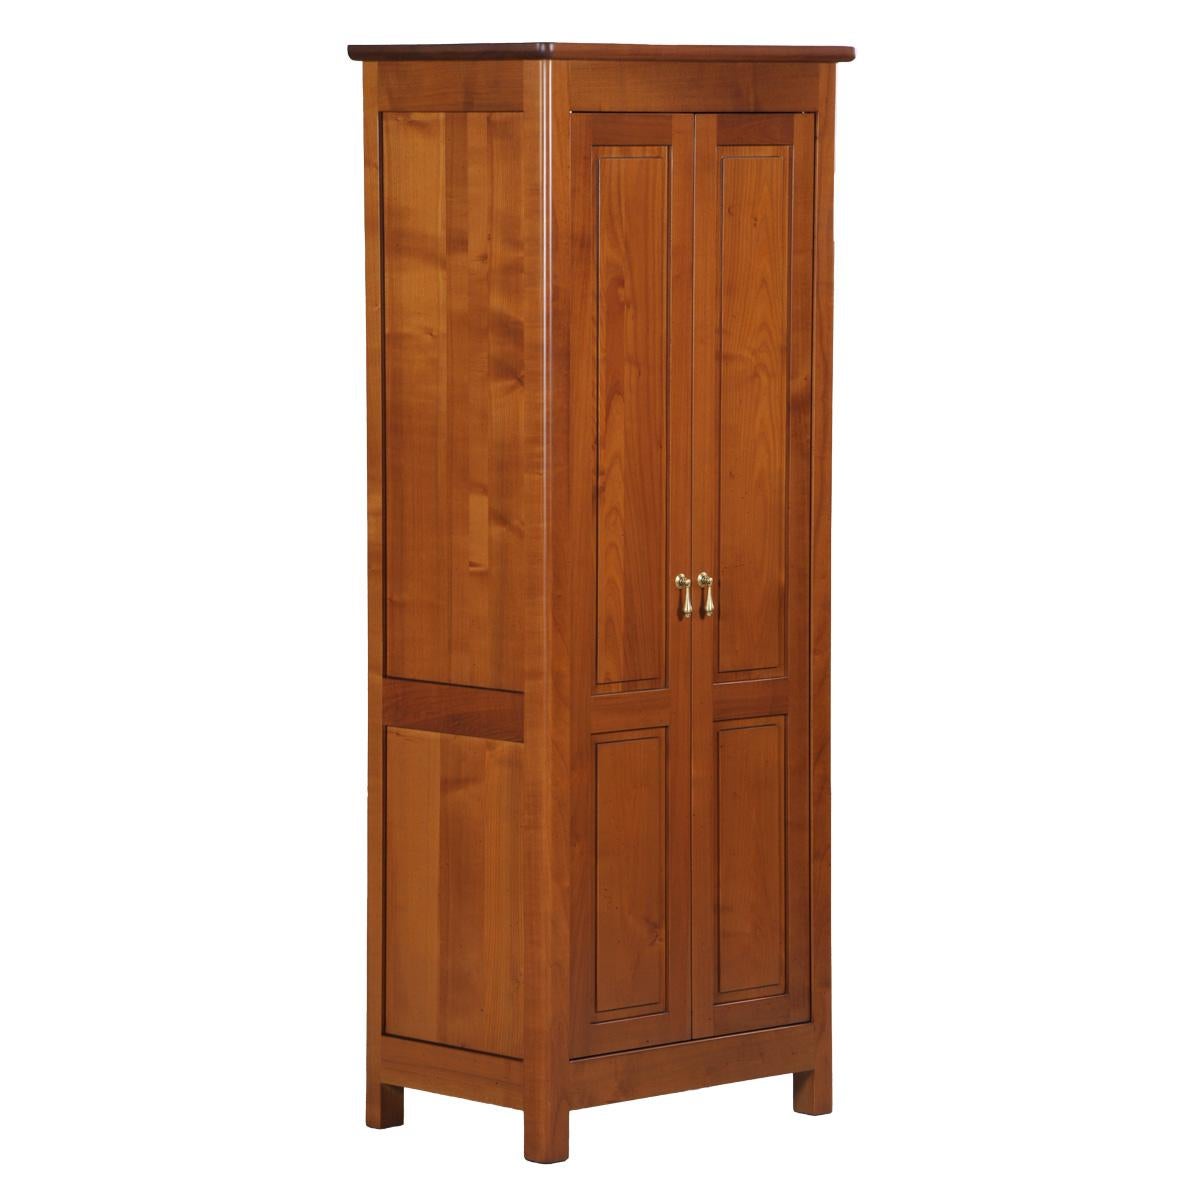 Neoclassical French Armoirette Cabinet with 1 folding Door in solid stained cherry wood For Sale